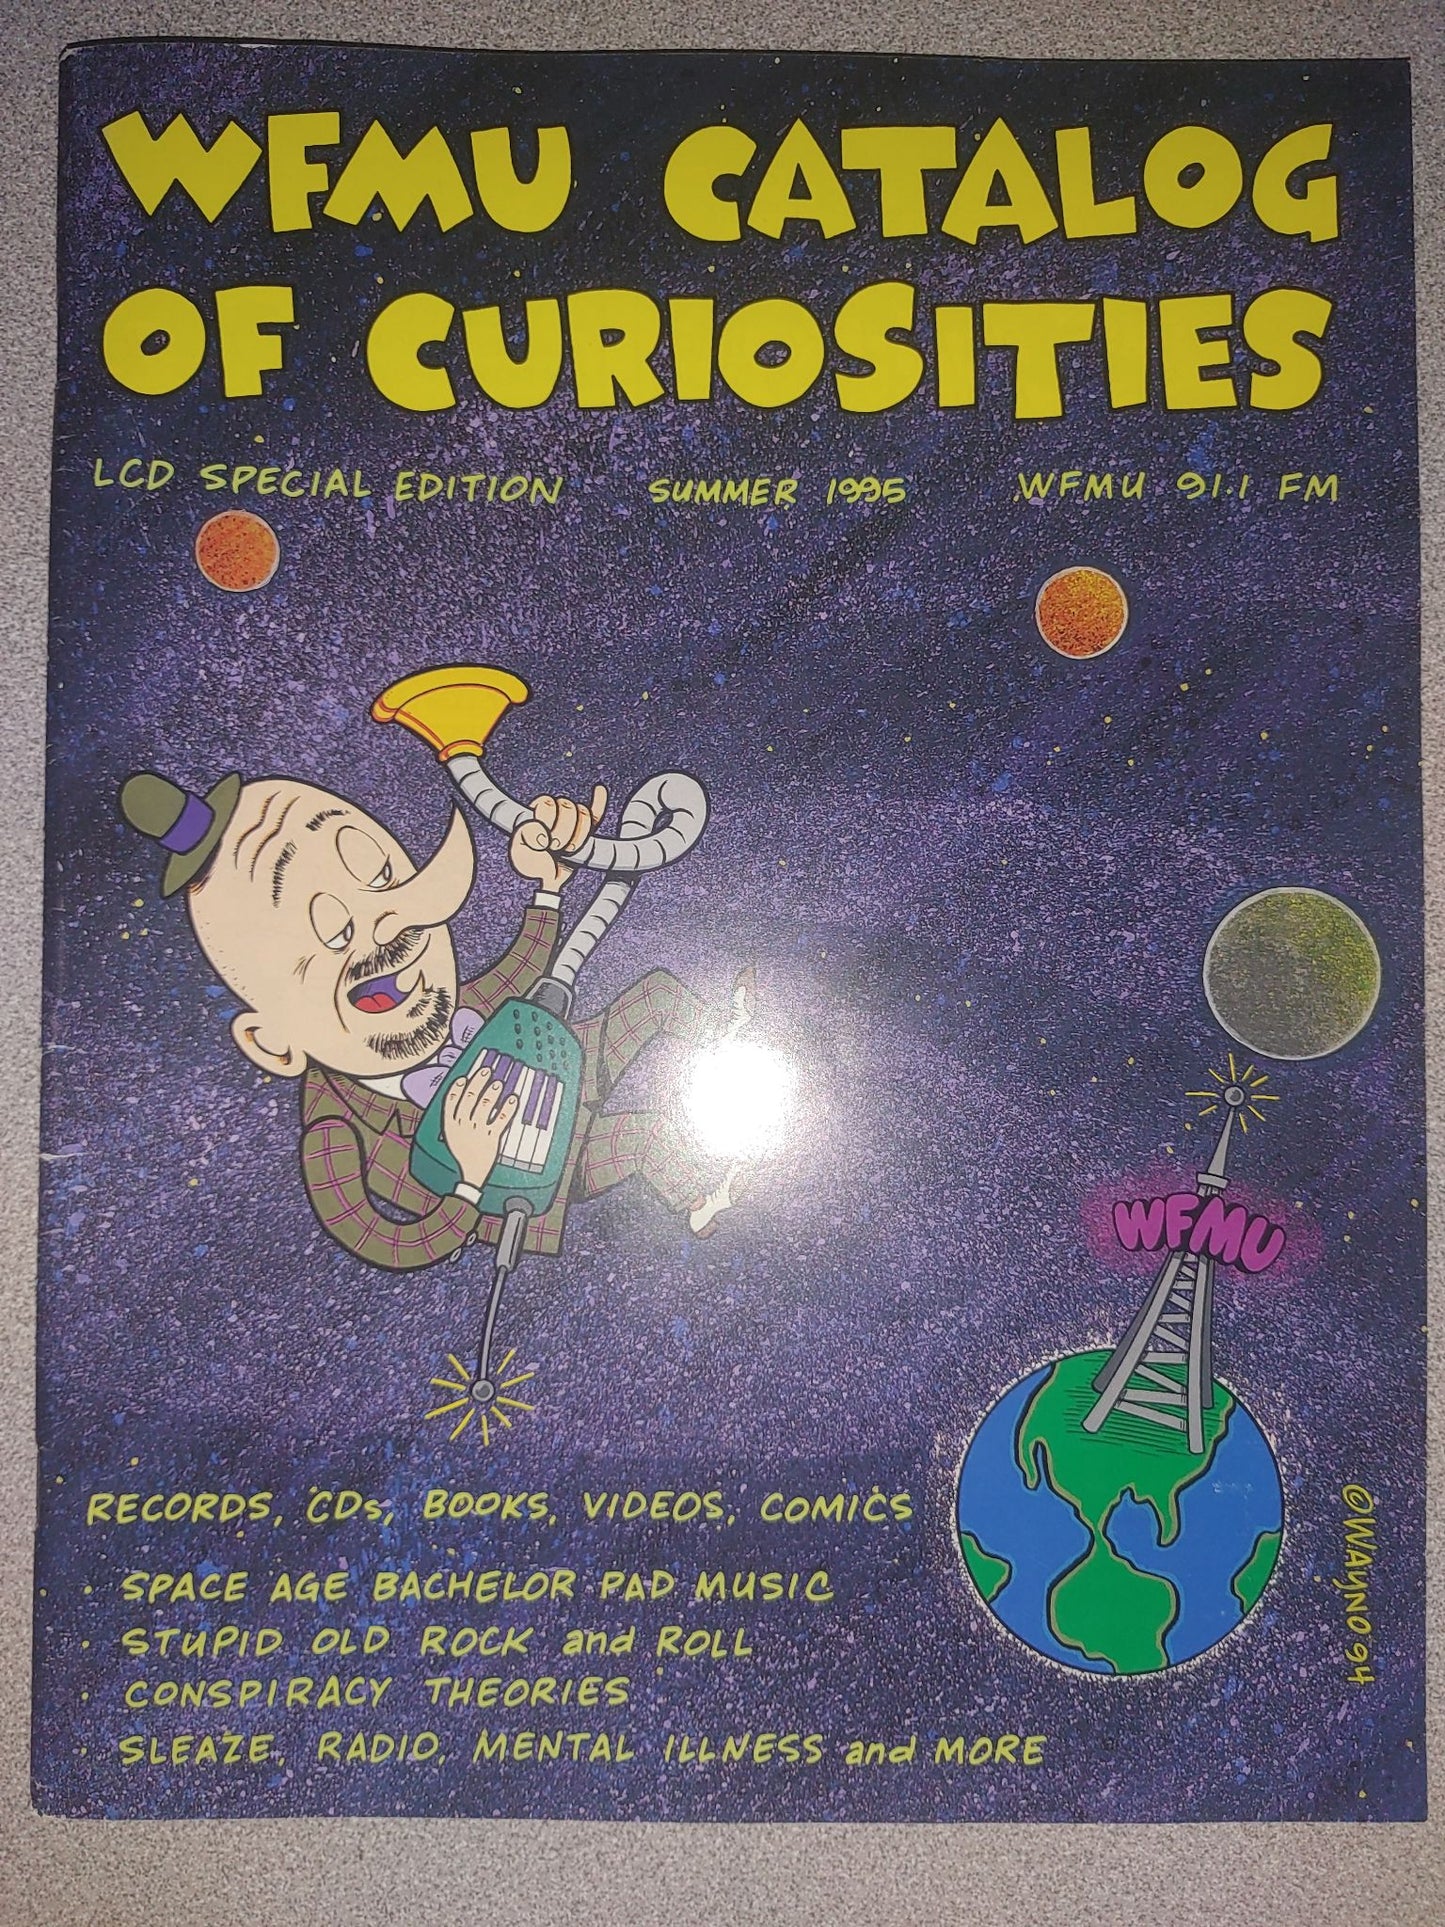 WMFU Catalog of Curiosities LCD Special Edition Summer 1995